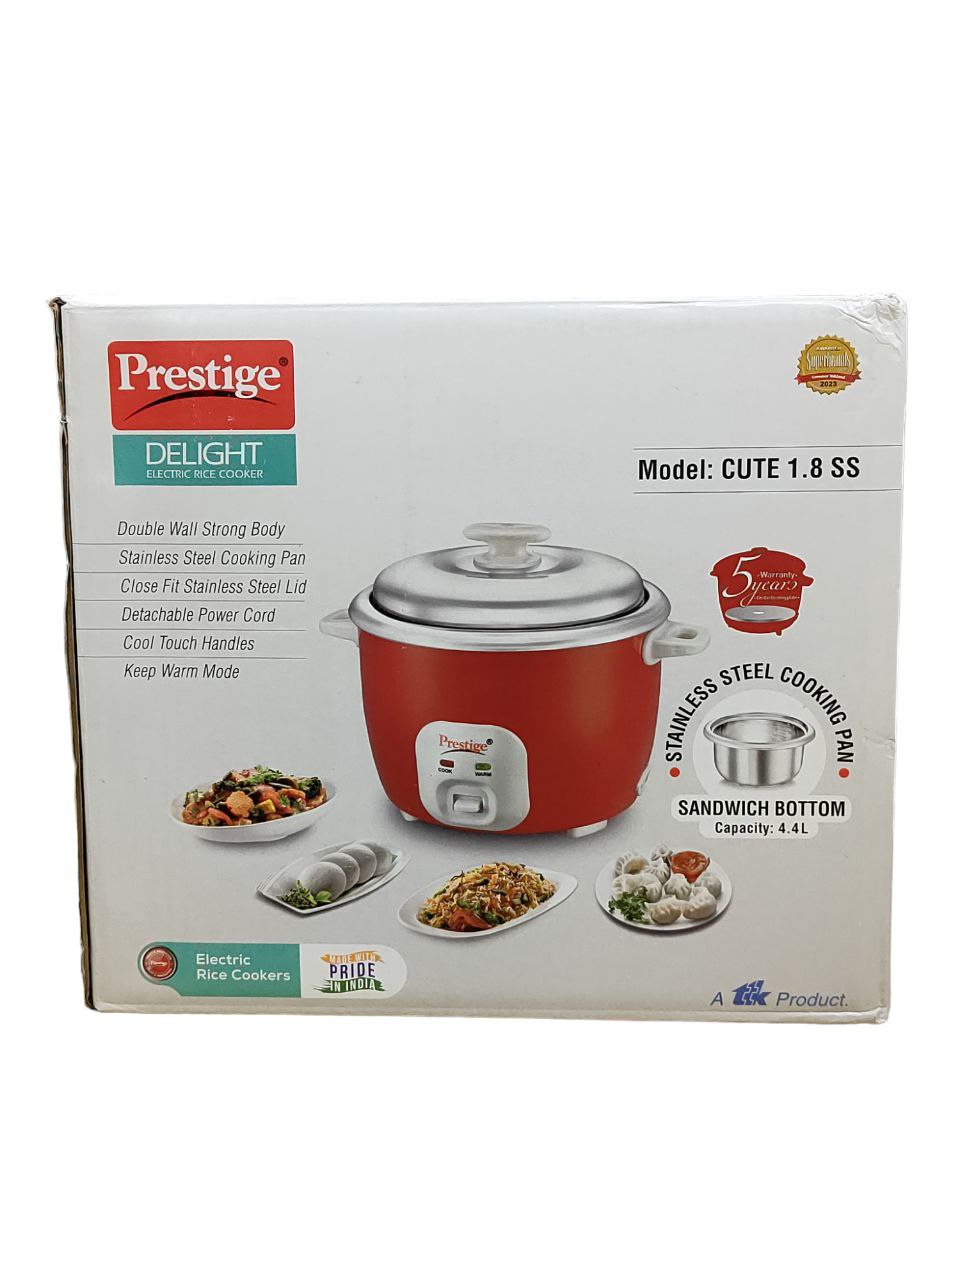 Prestige Delight Cute 1.8-SS Electric Rice Cooker | 1.8L Stainless Steel Pot, Keep-Warm Feature, Cool-Touch Handles | Versatile &amp; Efficient Kitchen Essential